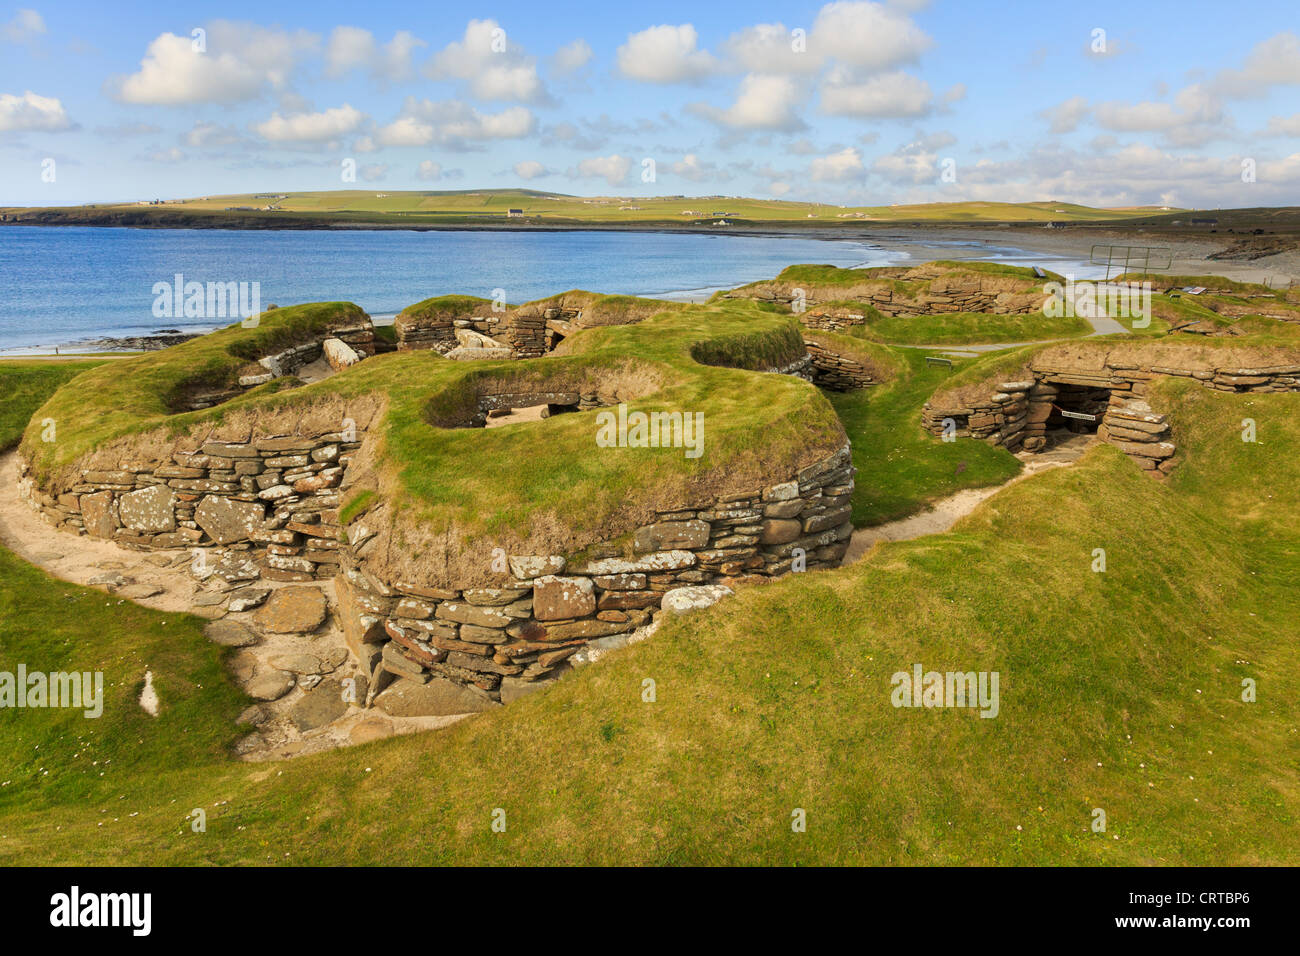 Excavations of ancient prehistoric houses in Neolithic village at Skara Brae by Bay of Skaill Orkney Islands Scotland UK Britain Stock Photo